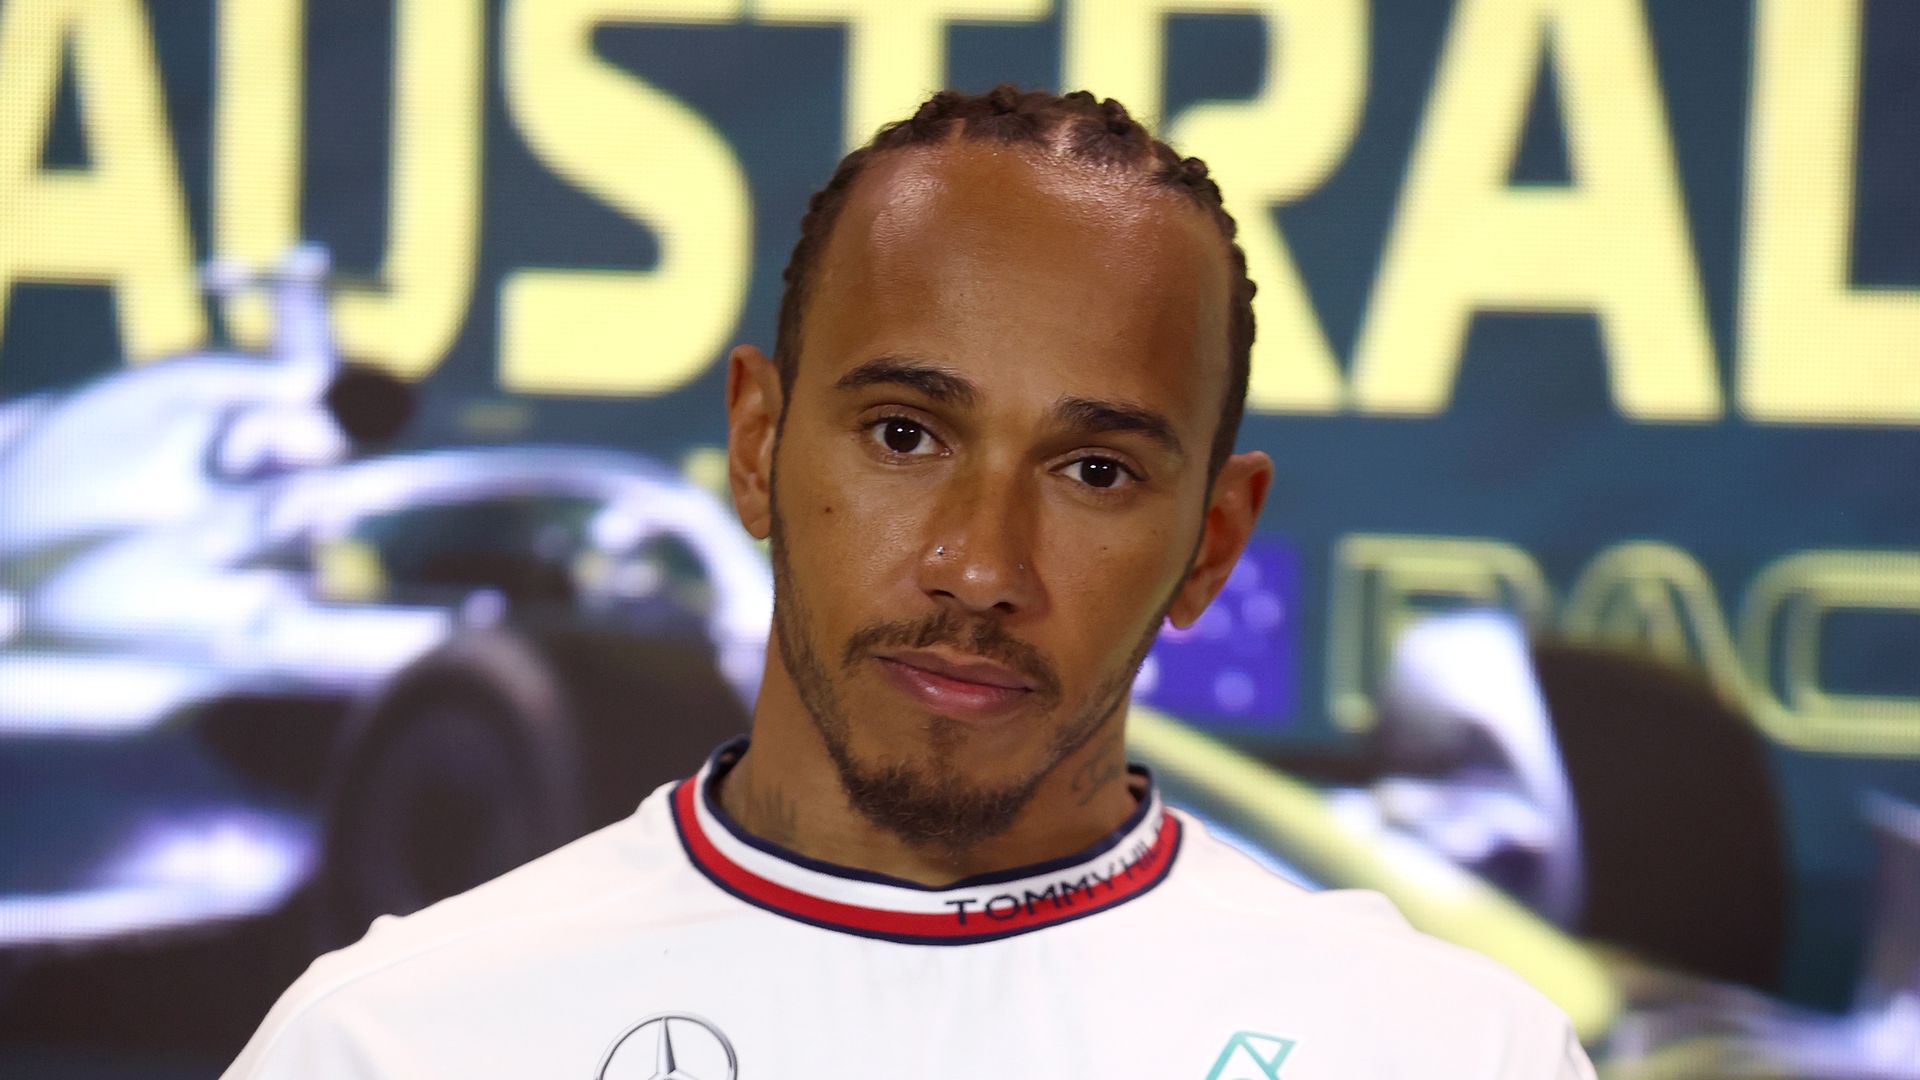 Lewis Hamilton in a white top with a microphone